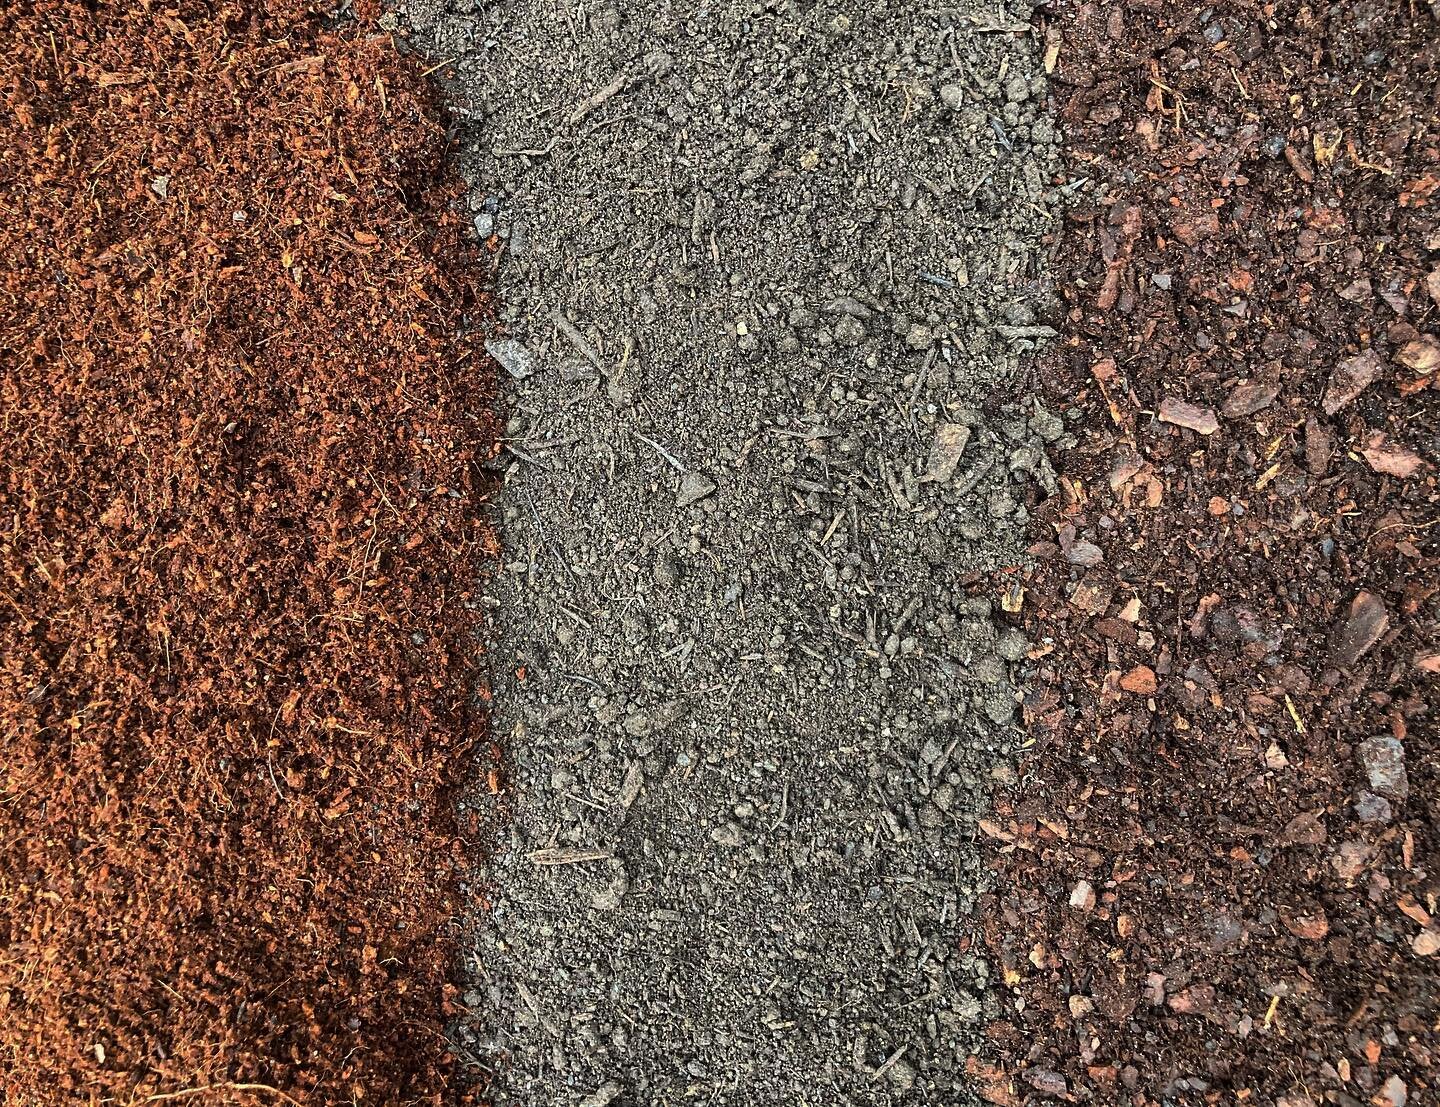 Left to right: Super-washed coco coir, double-screened organic compost and propagation-grade aged bark fines. We pre-blend these three premium ingredients into the base mix that is the perfect, well-rounded foundation for all four of our organic livi